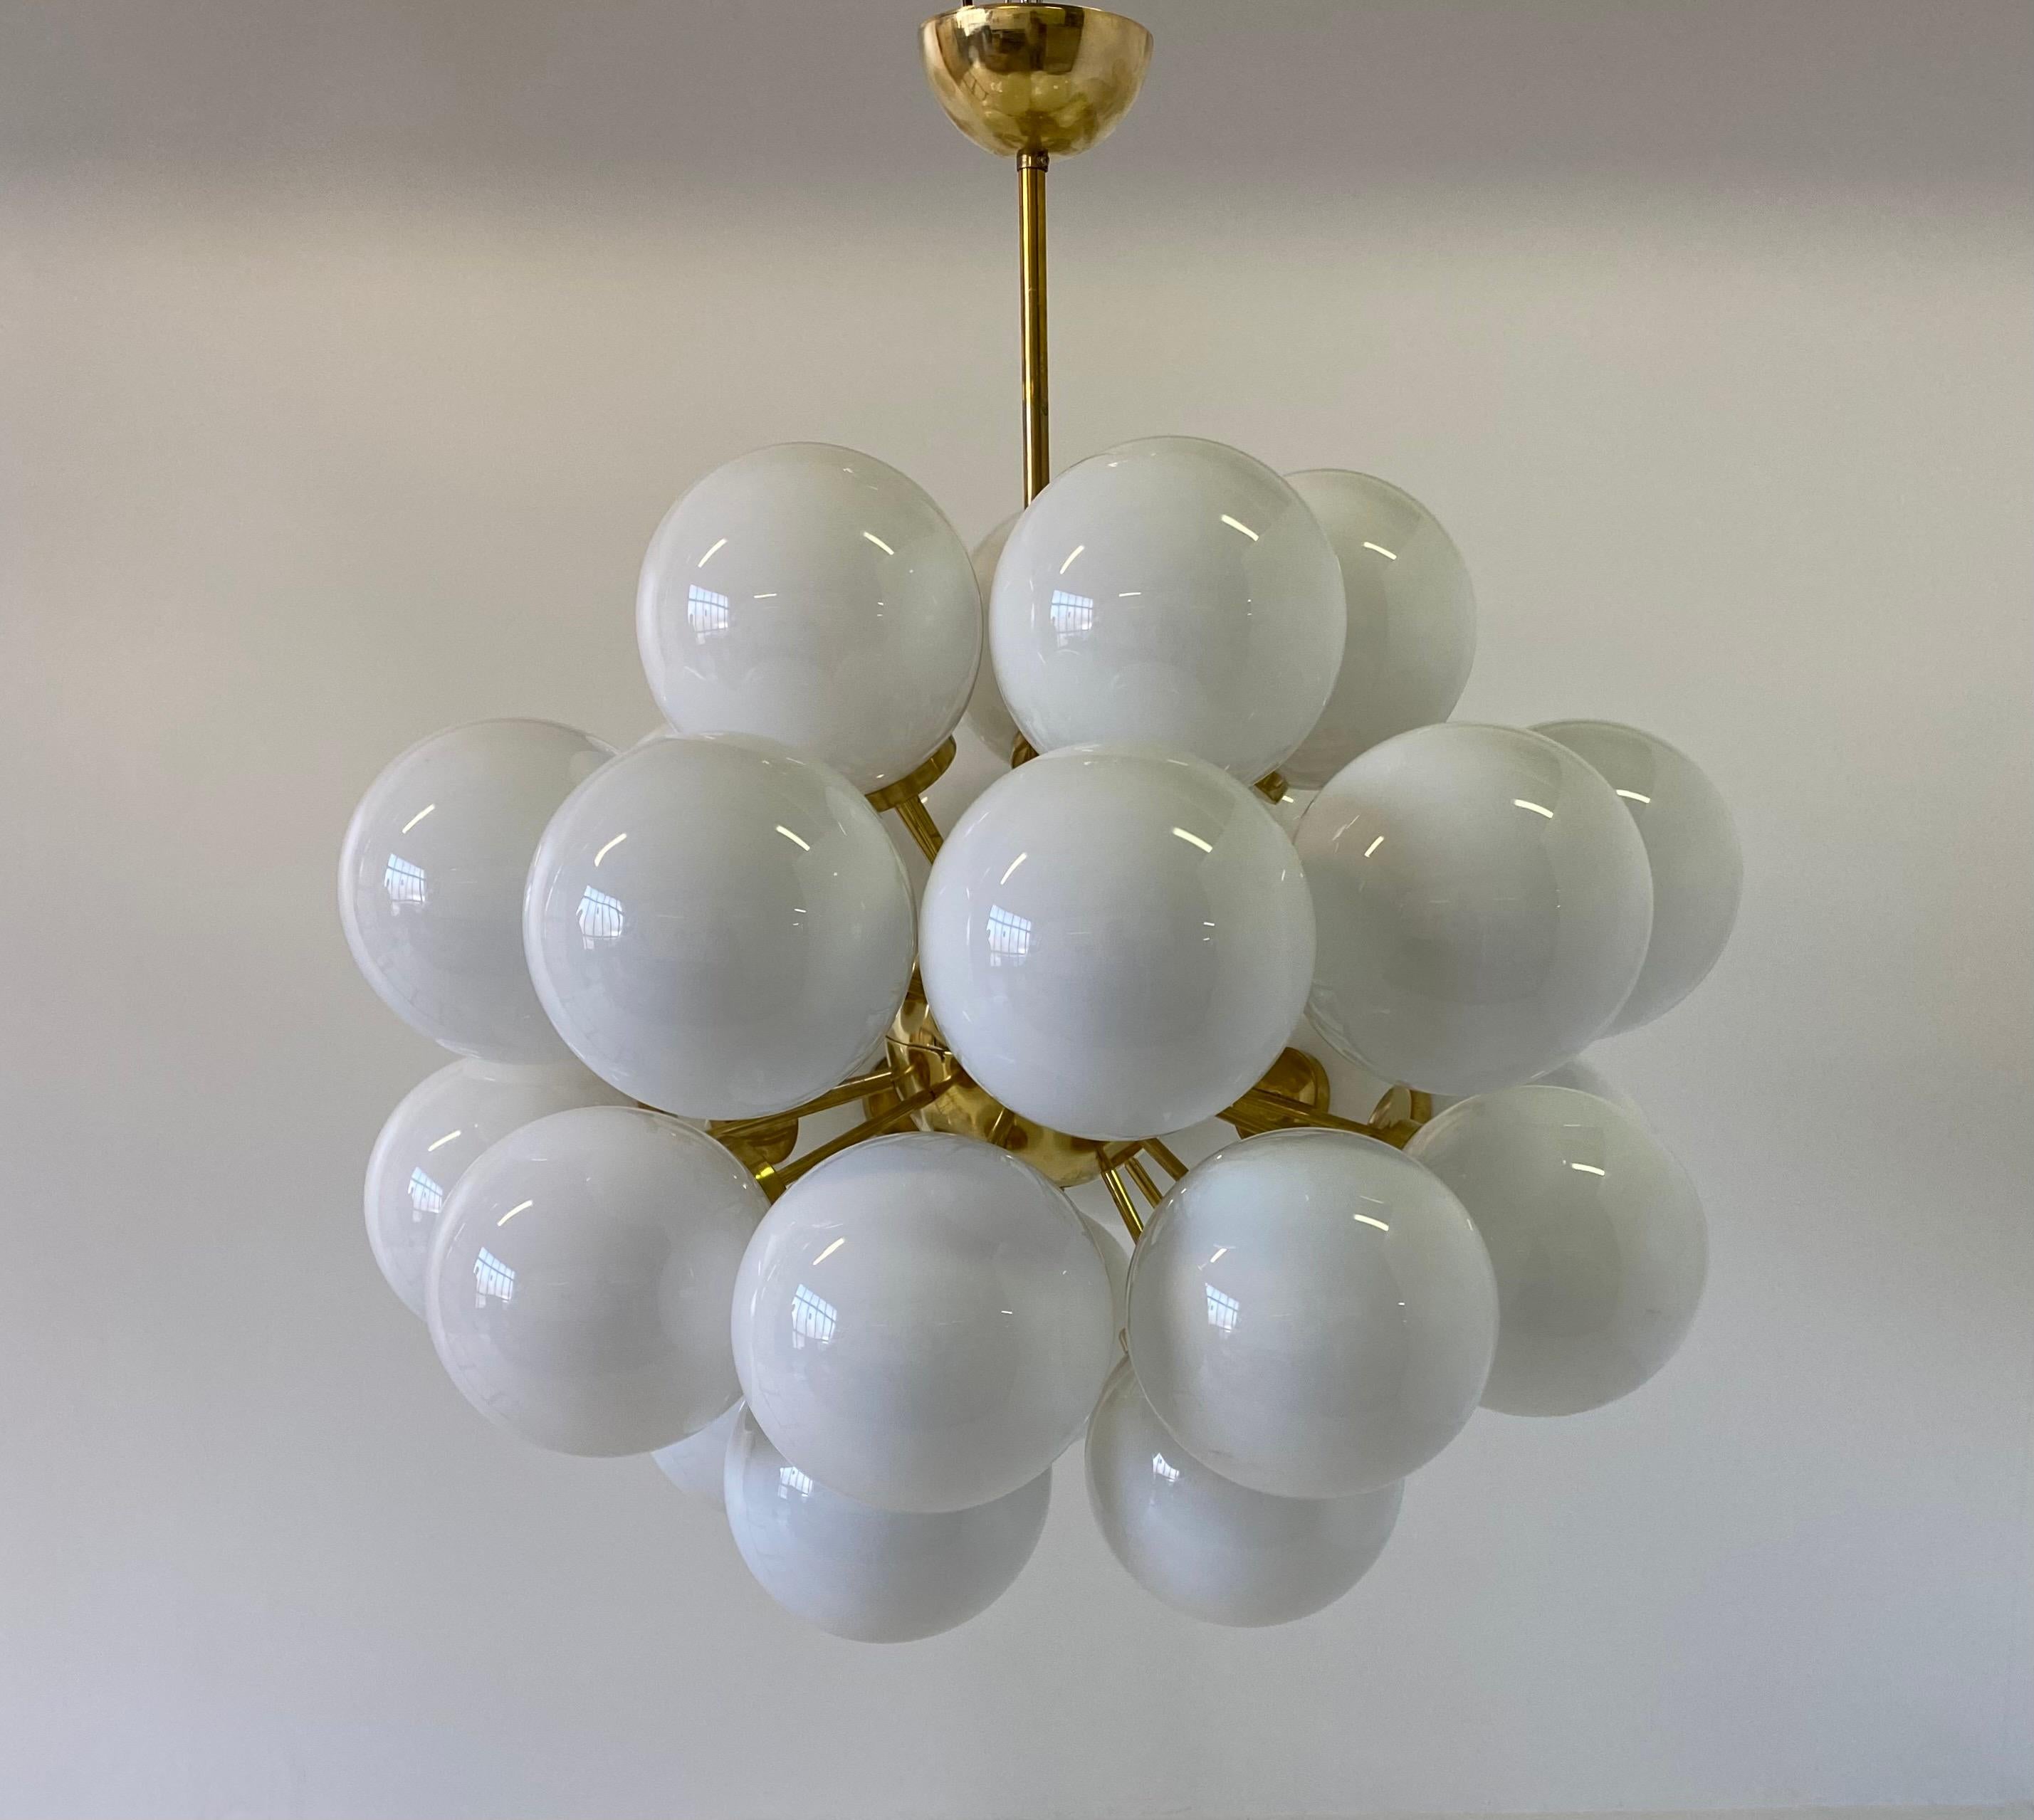 Contemporary Mid-Century Modern Brass and White Murano Glass Spheres Chandelier